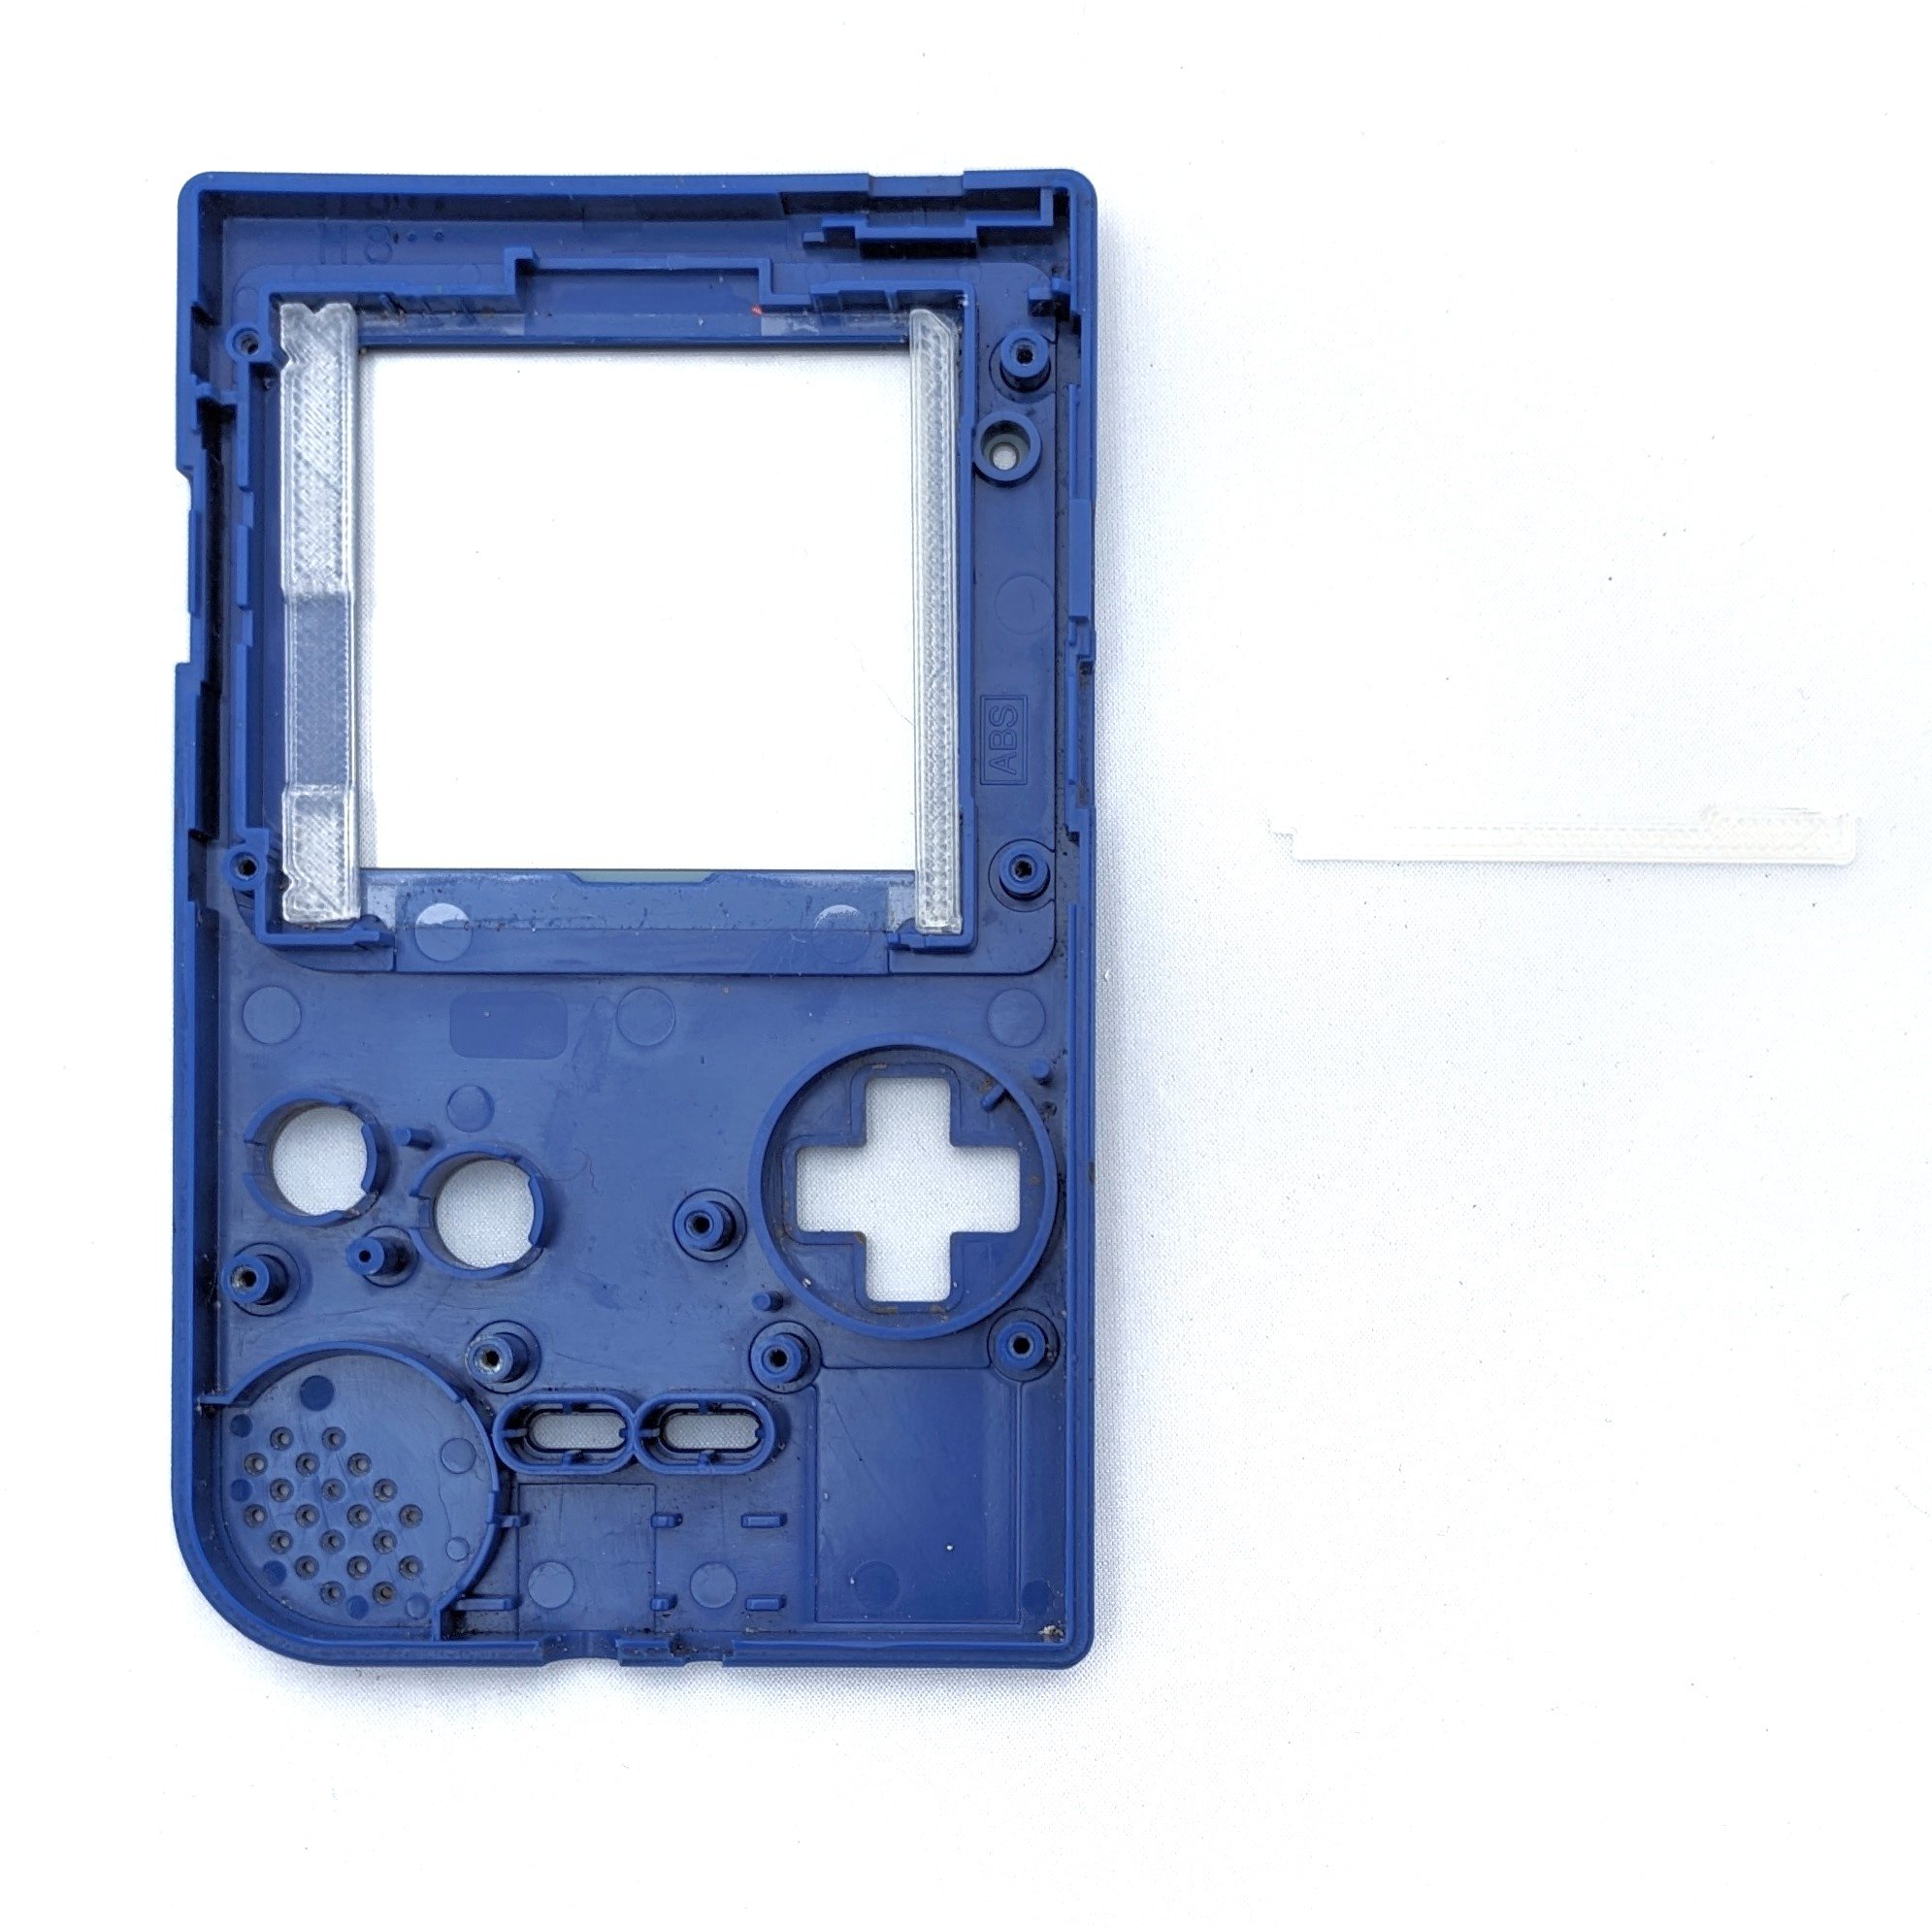 The inside of the front shell of the Game Boy, with bumpers dispalyed next to the screen.